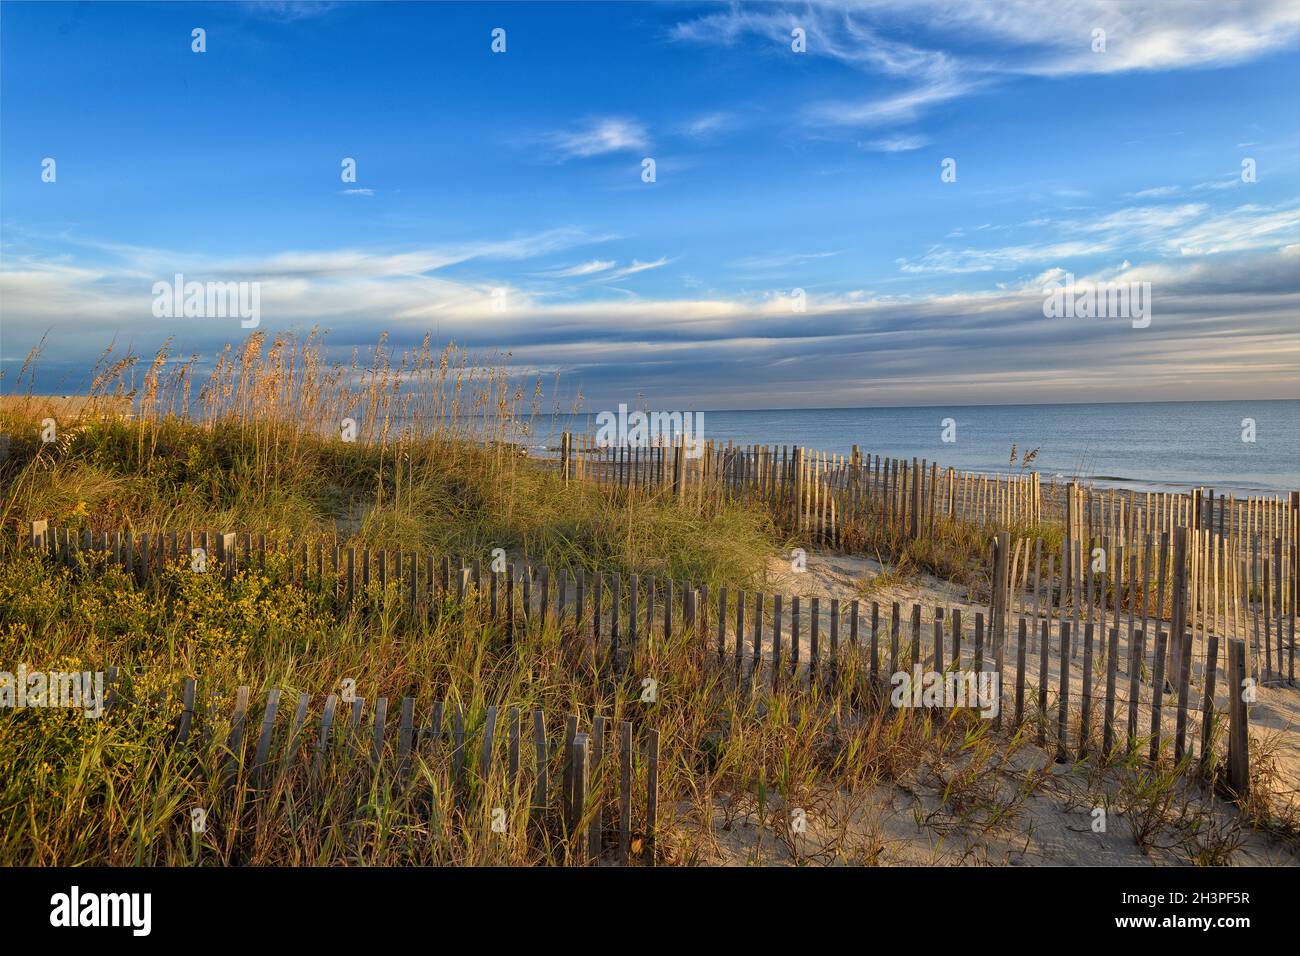 Wooden fences and sea oats, Nags Head North Carolina, Outer Banks Stock Photo